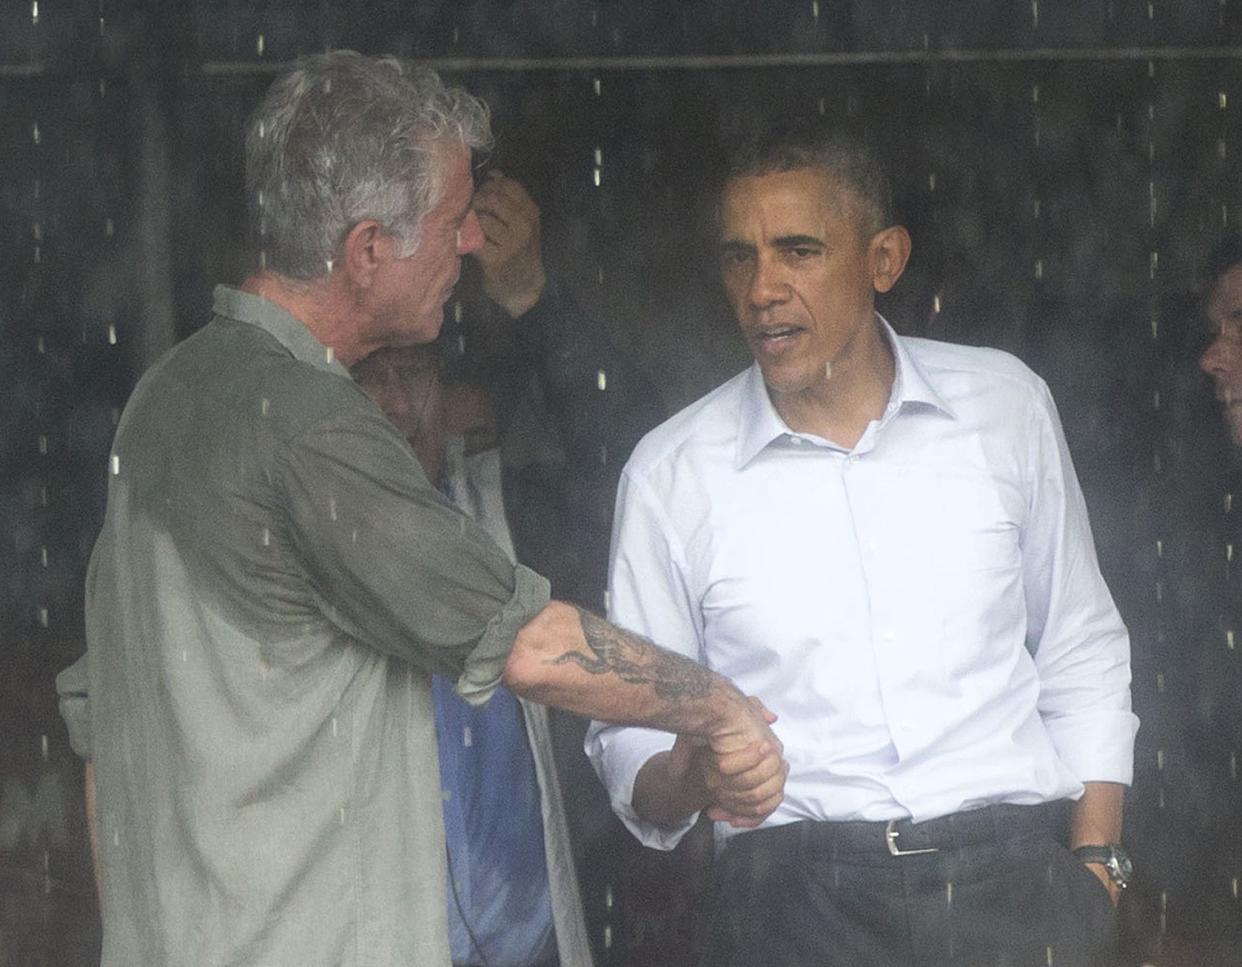 U.S. President Barack Obama and Anthony Bourdain shake hands at a shopping area in Hanoi, Vietnam on May 24, 2016. The former president taped the second part of an interview with Bourdain before leaving the Vietnamese capital for Ho Chi Minh City.